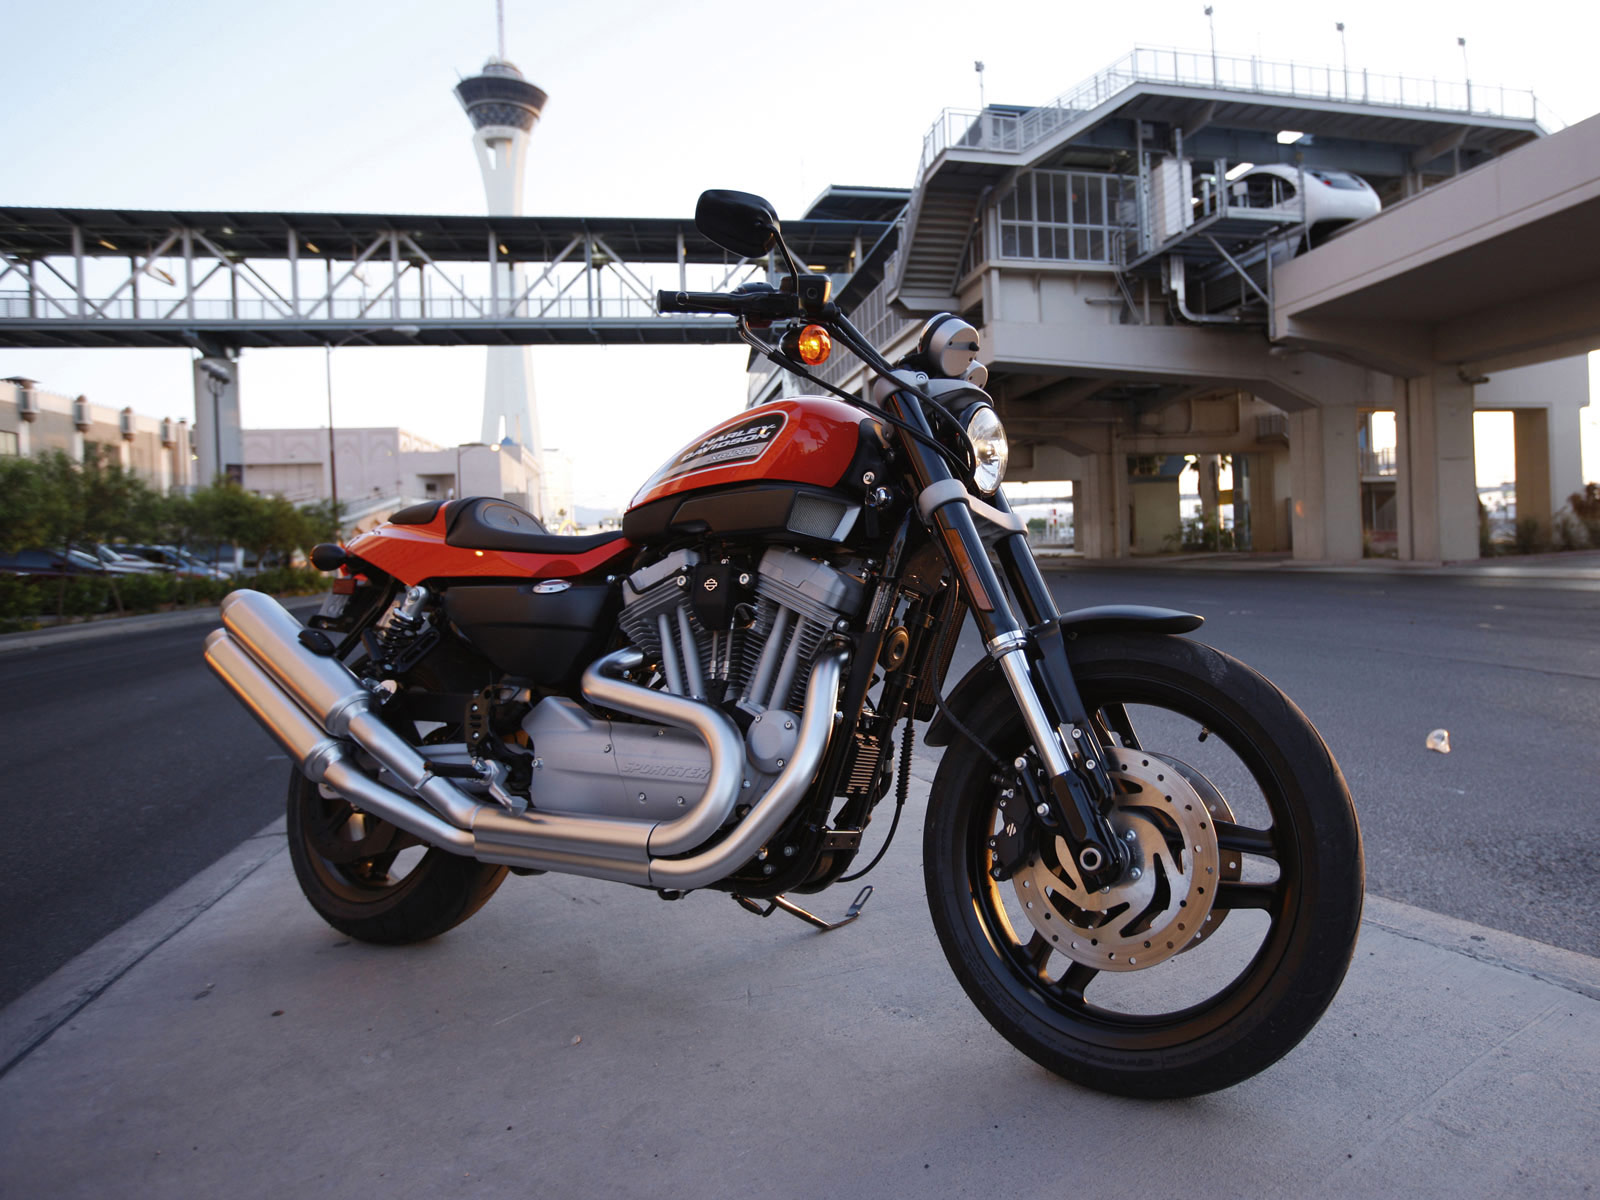 Harley Davidson Pictures Specs Insurance Accident Lawyers Images, Photos, Reviews